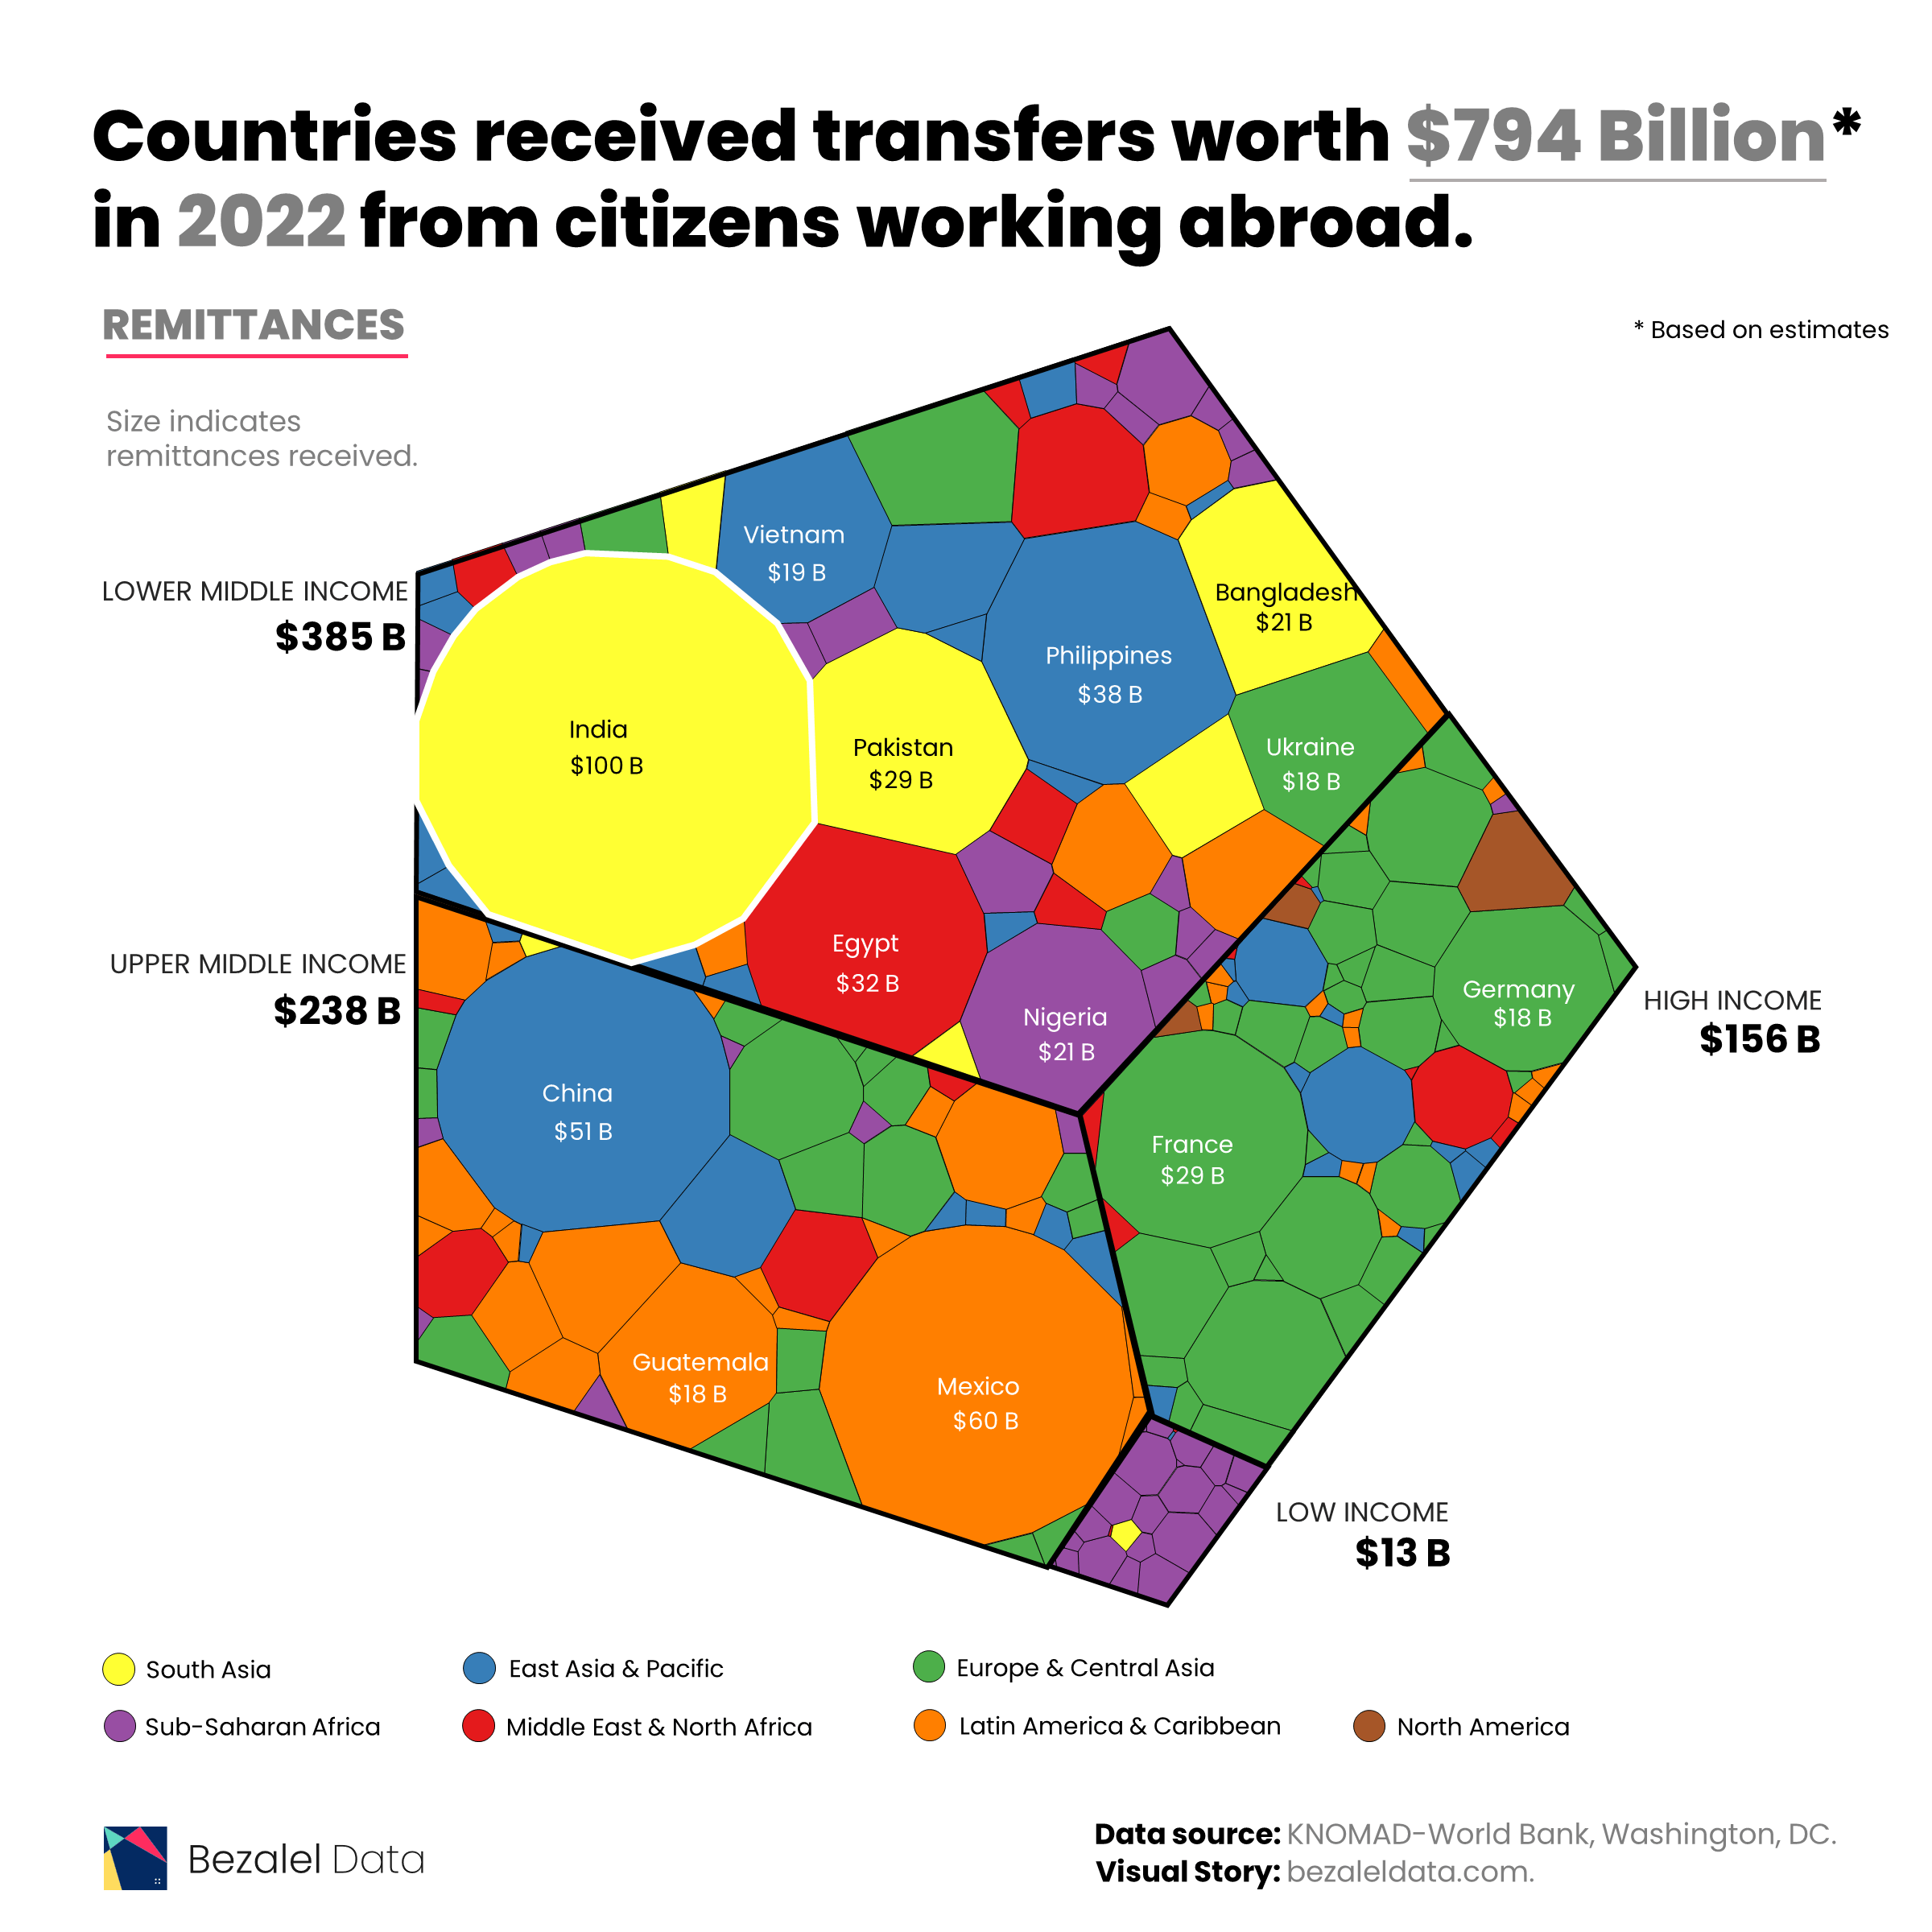 Remittances in 2022